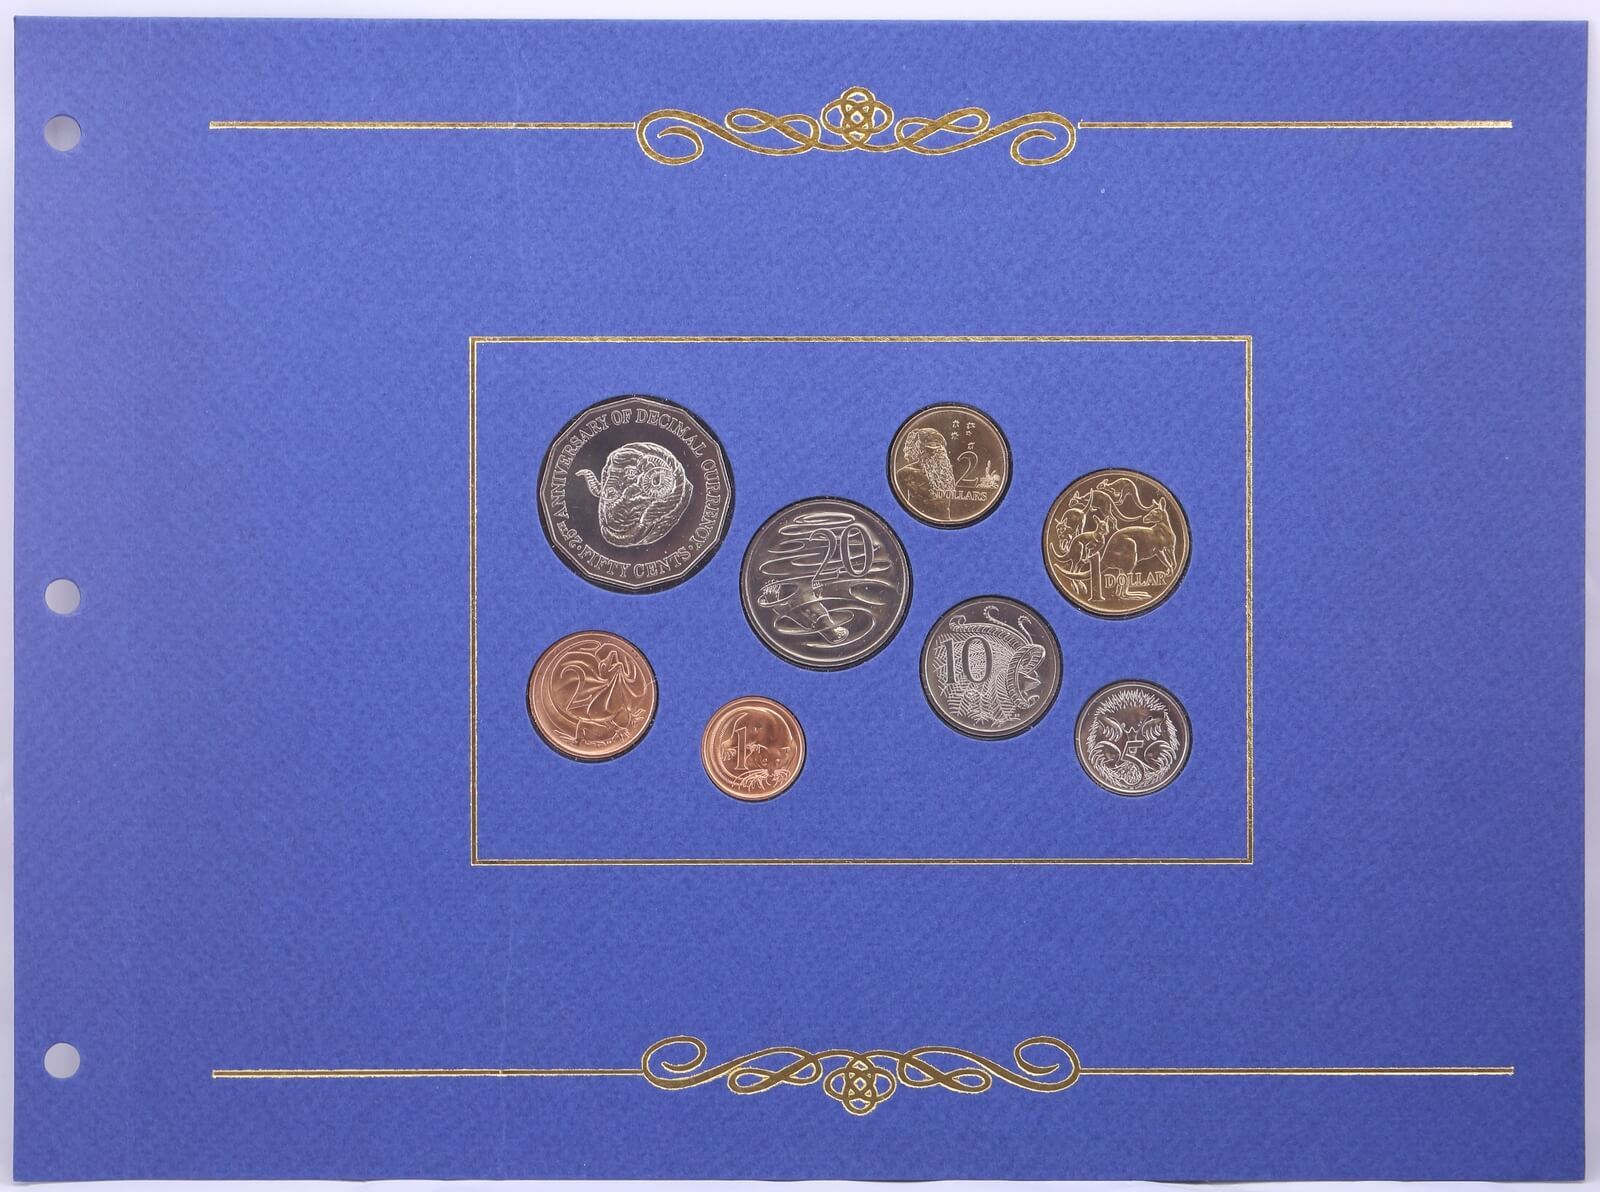 1991 Decimal Coin and Note Set 25th Anniversary of Decimal Currency Uncirculated product image